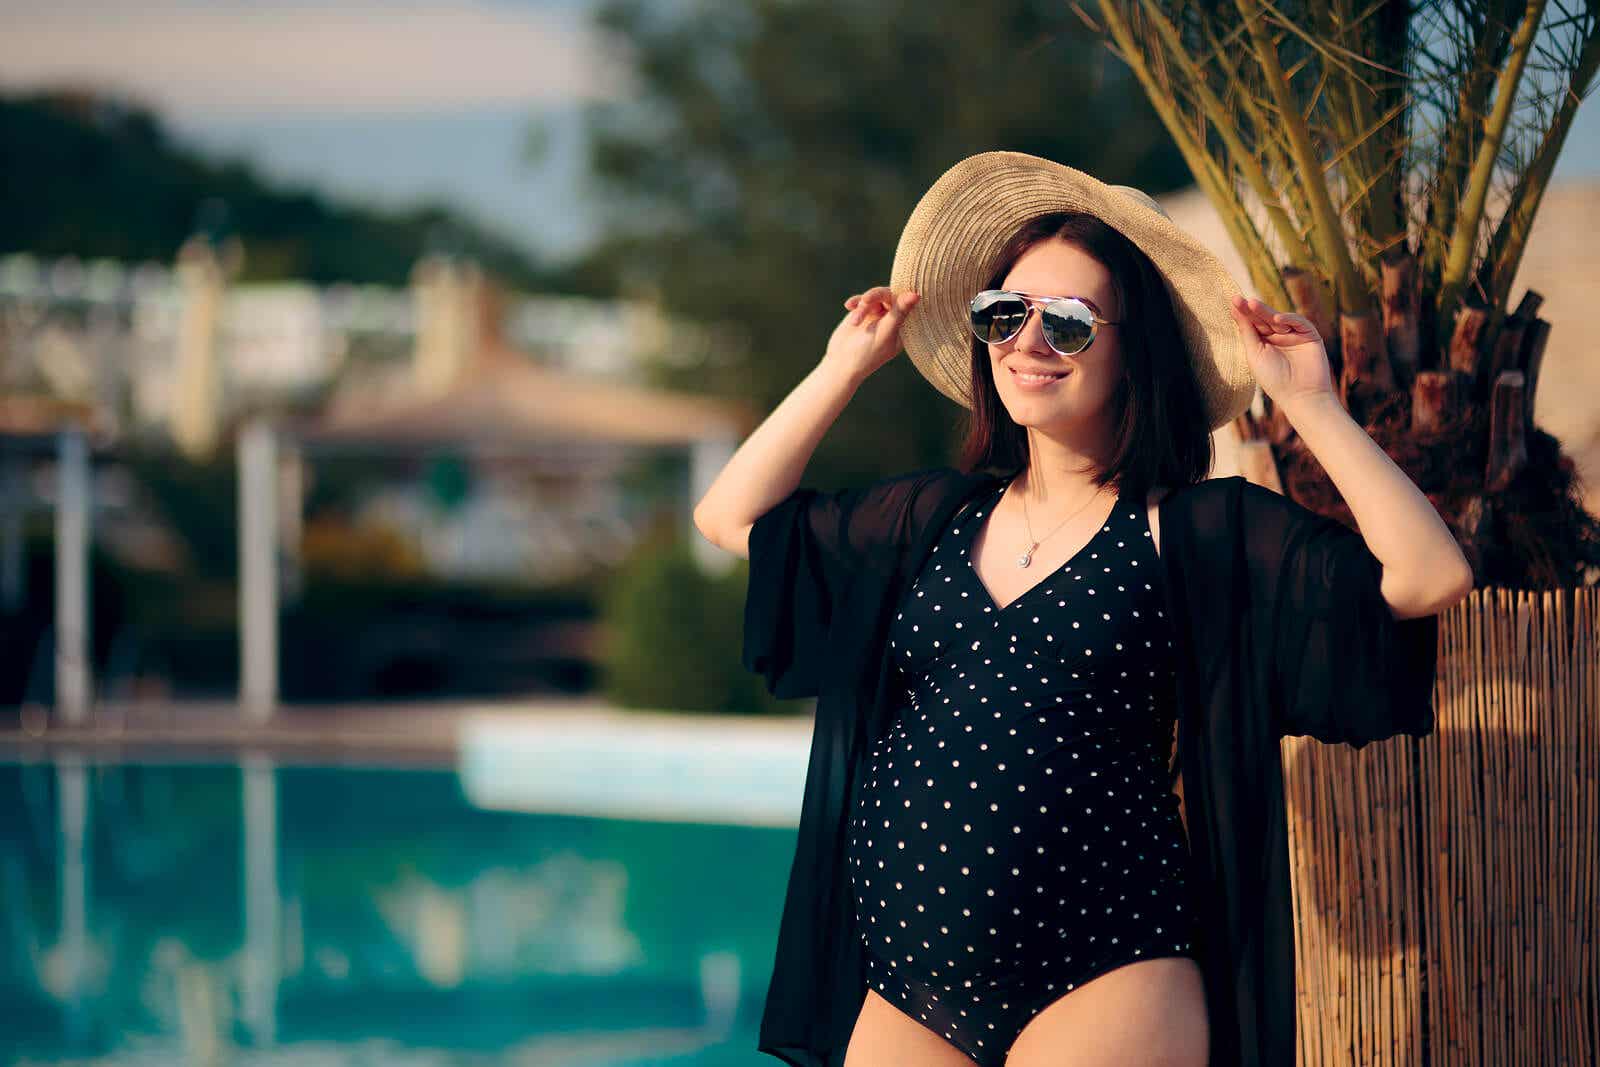 A pregnant woman standing in the sun by a pool.